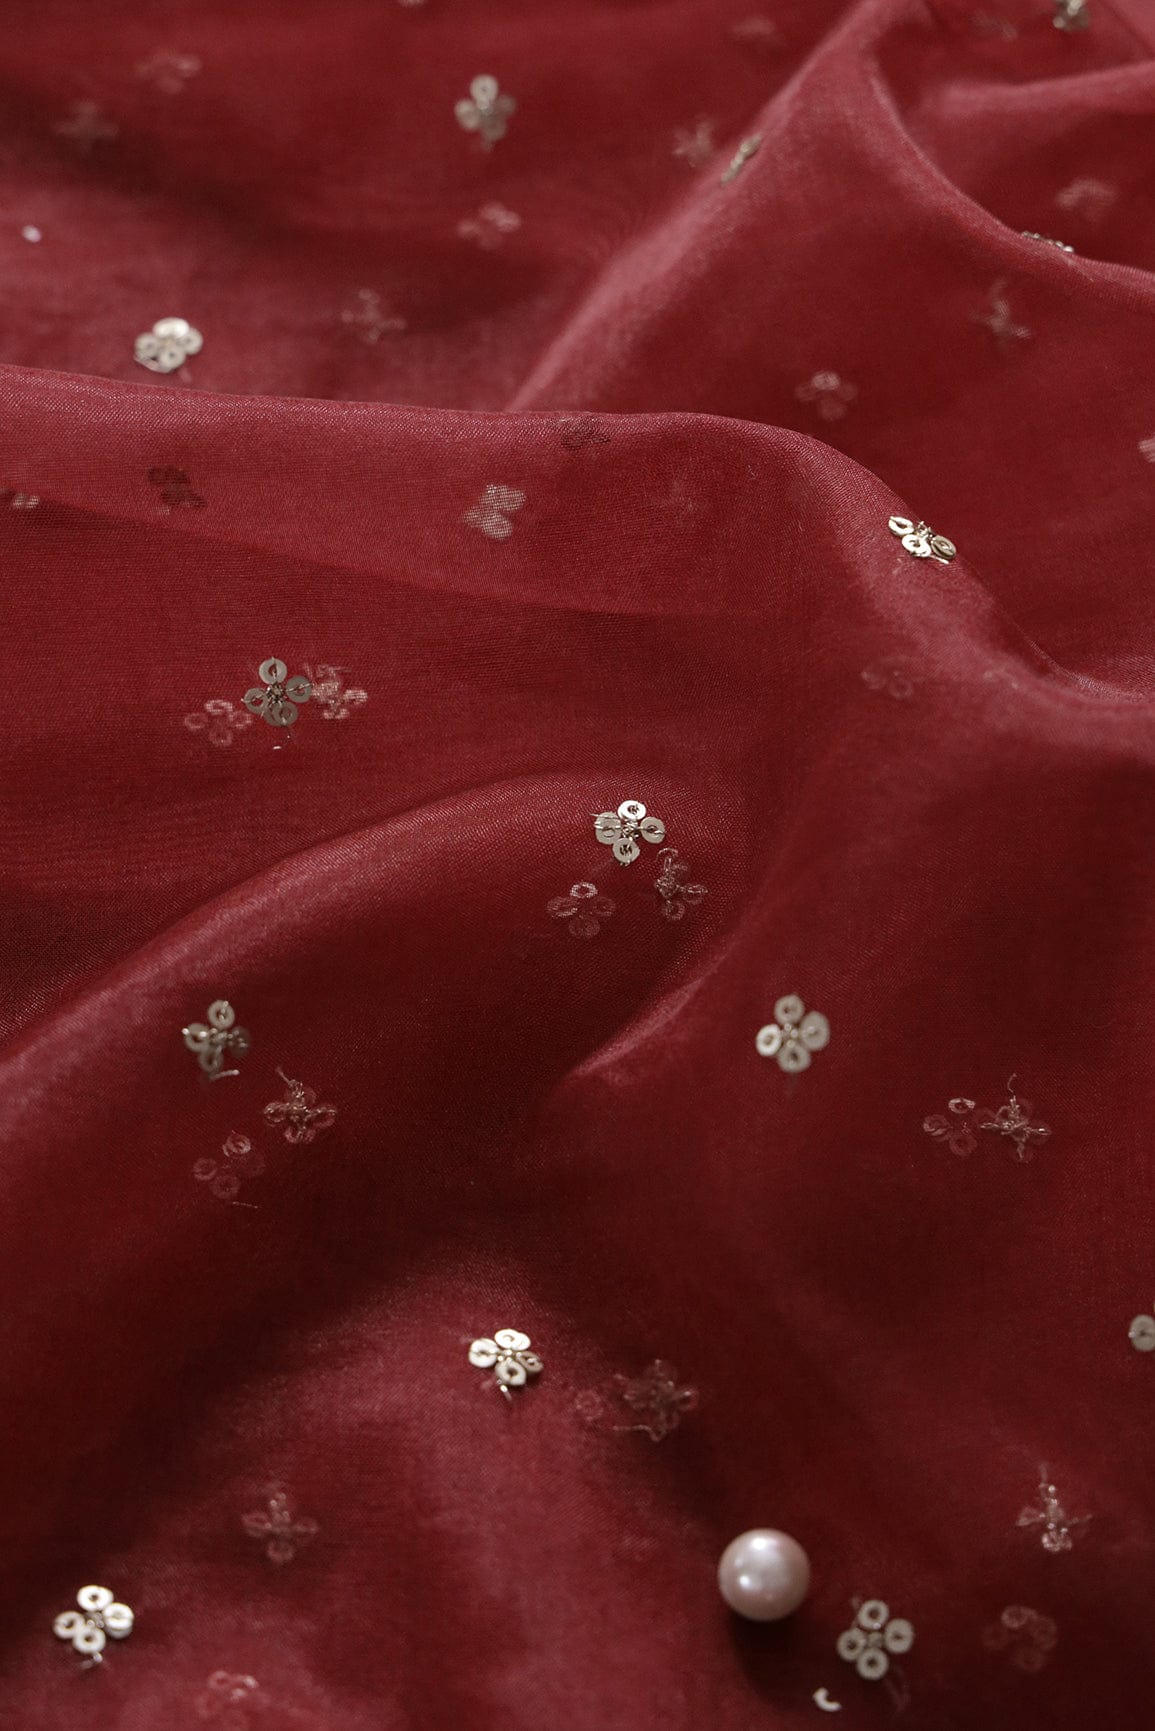 doeraa Embroidery Fabrics Gold Sequins Small Motif Embroidery Work On Maroon Organza Fabric